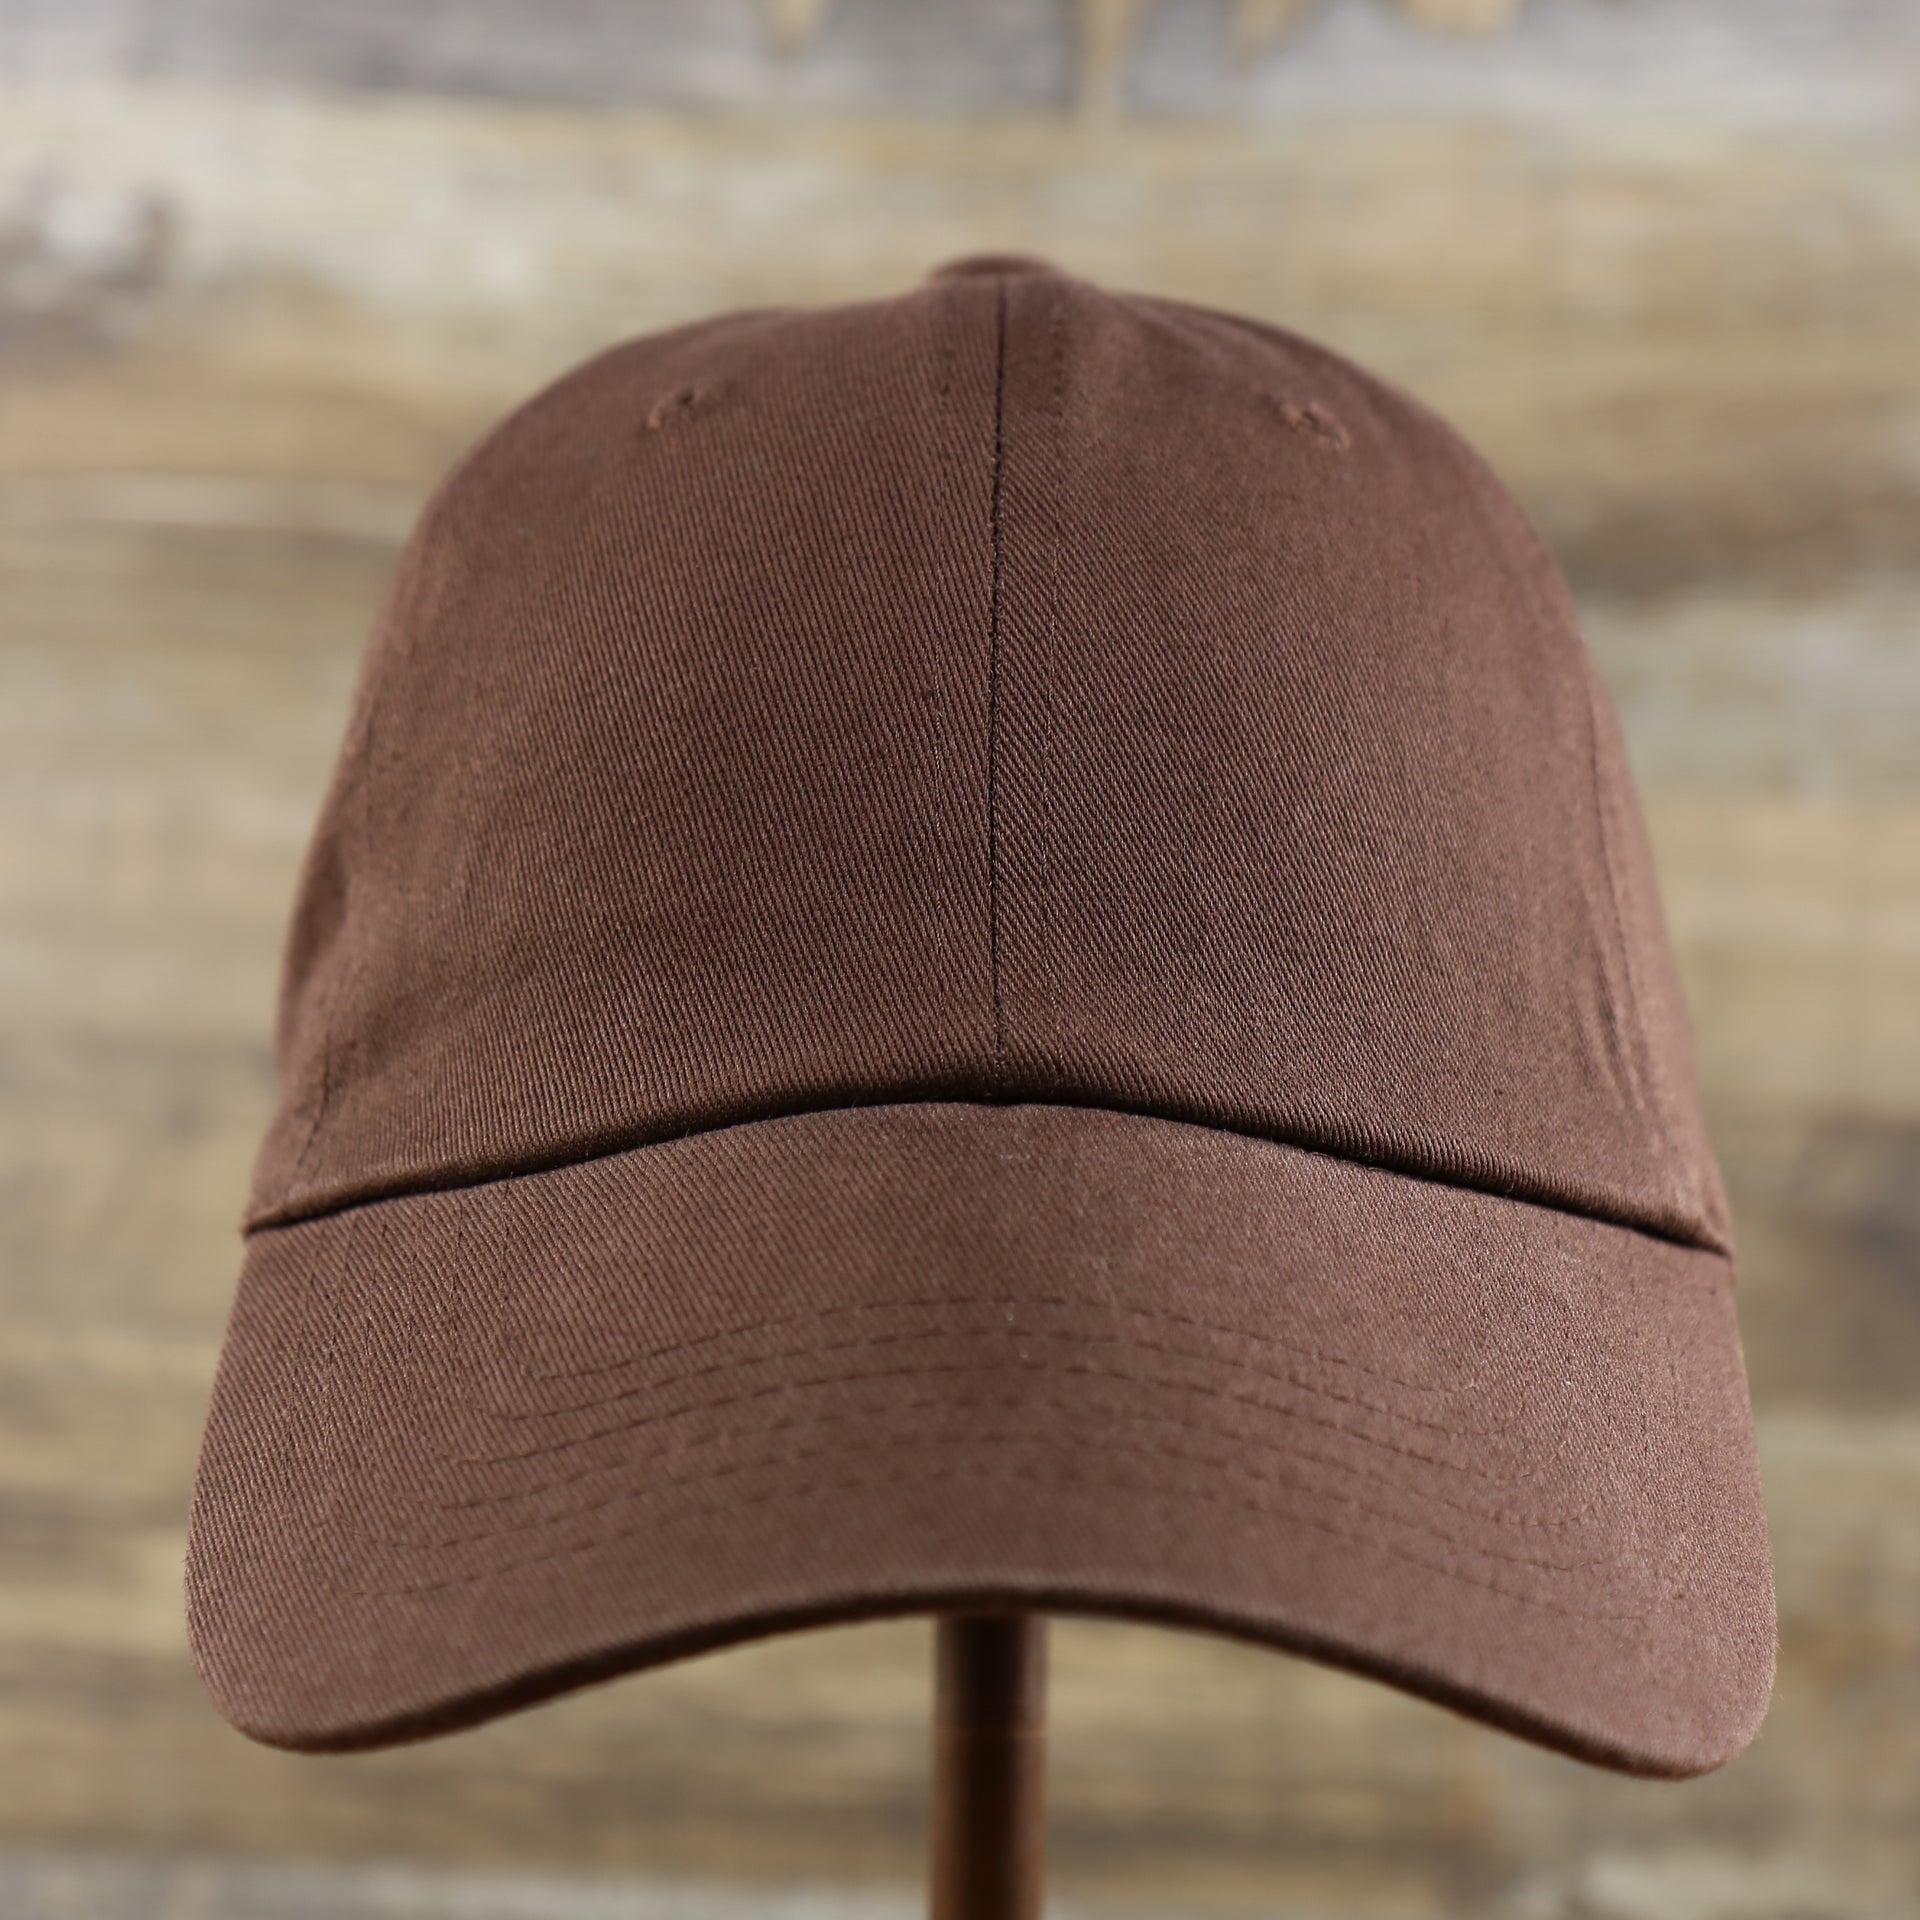 The front of the Chocolate Bent Brim Blank Baseball Hat | Brown Dad Hat